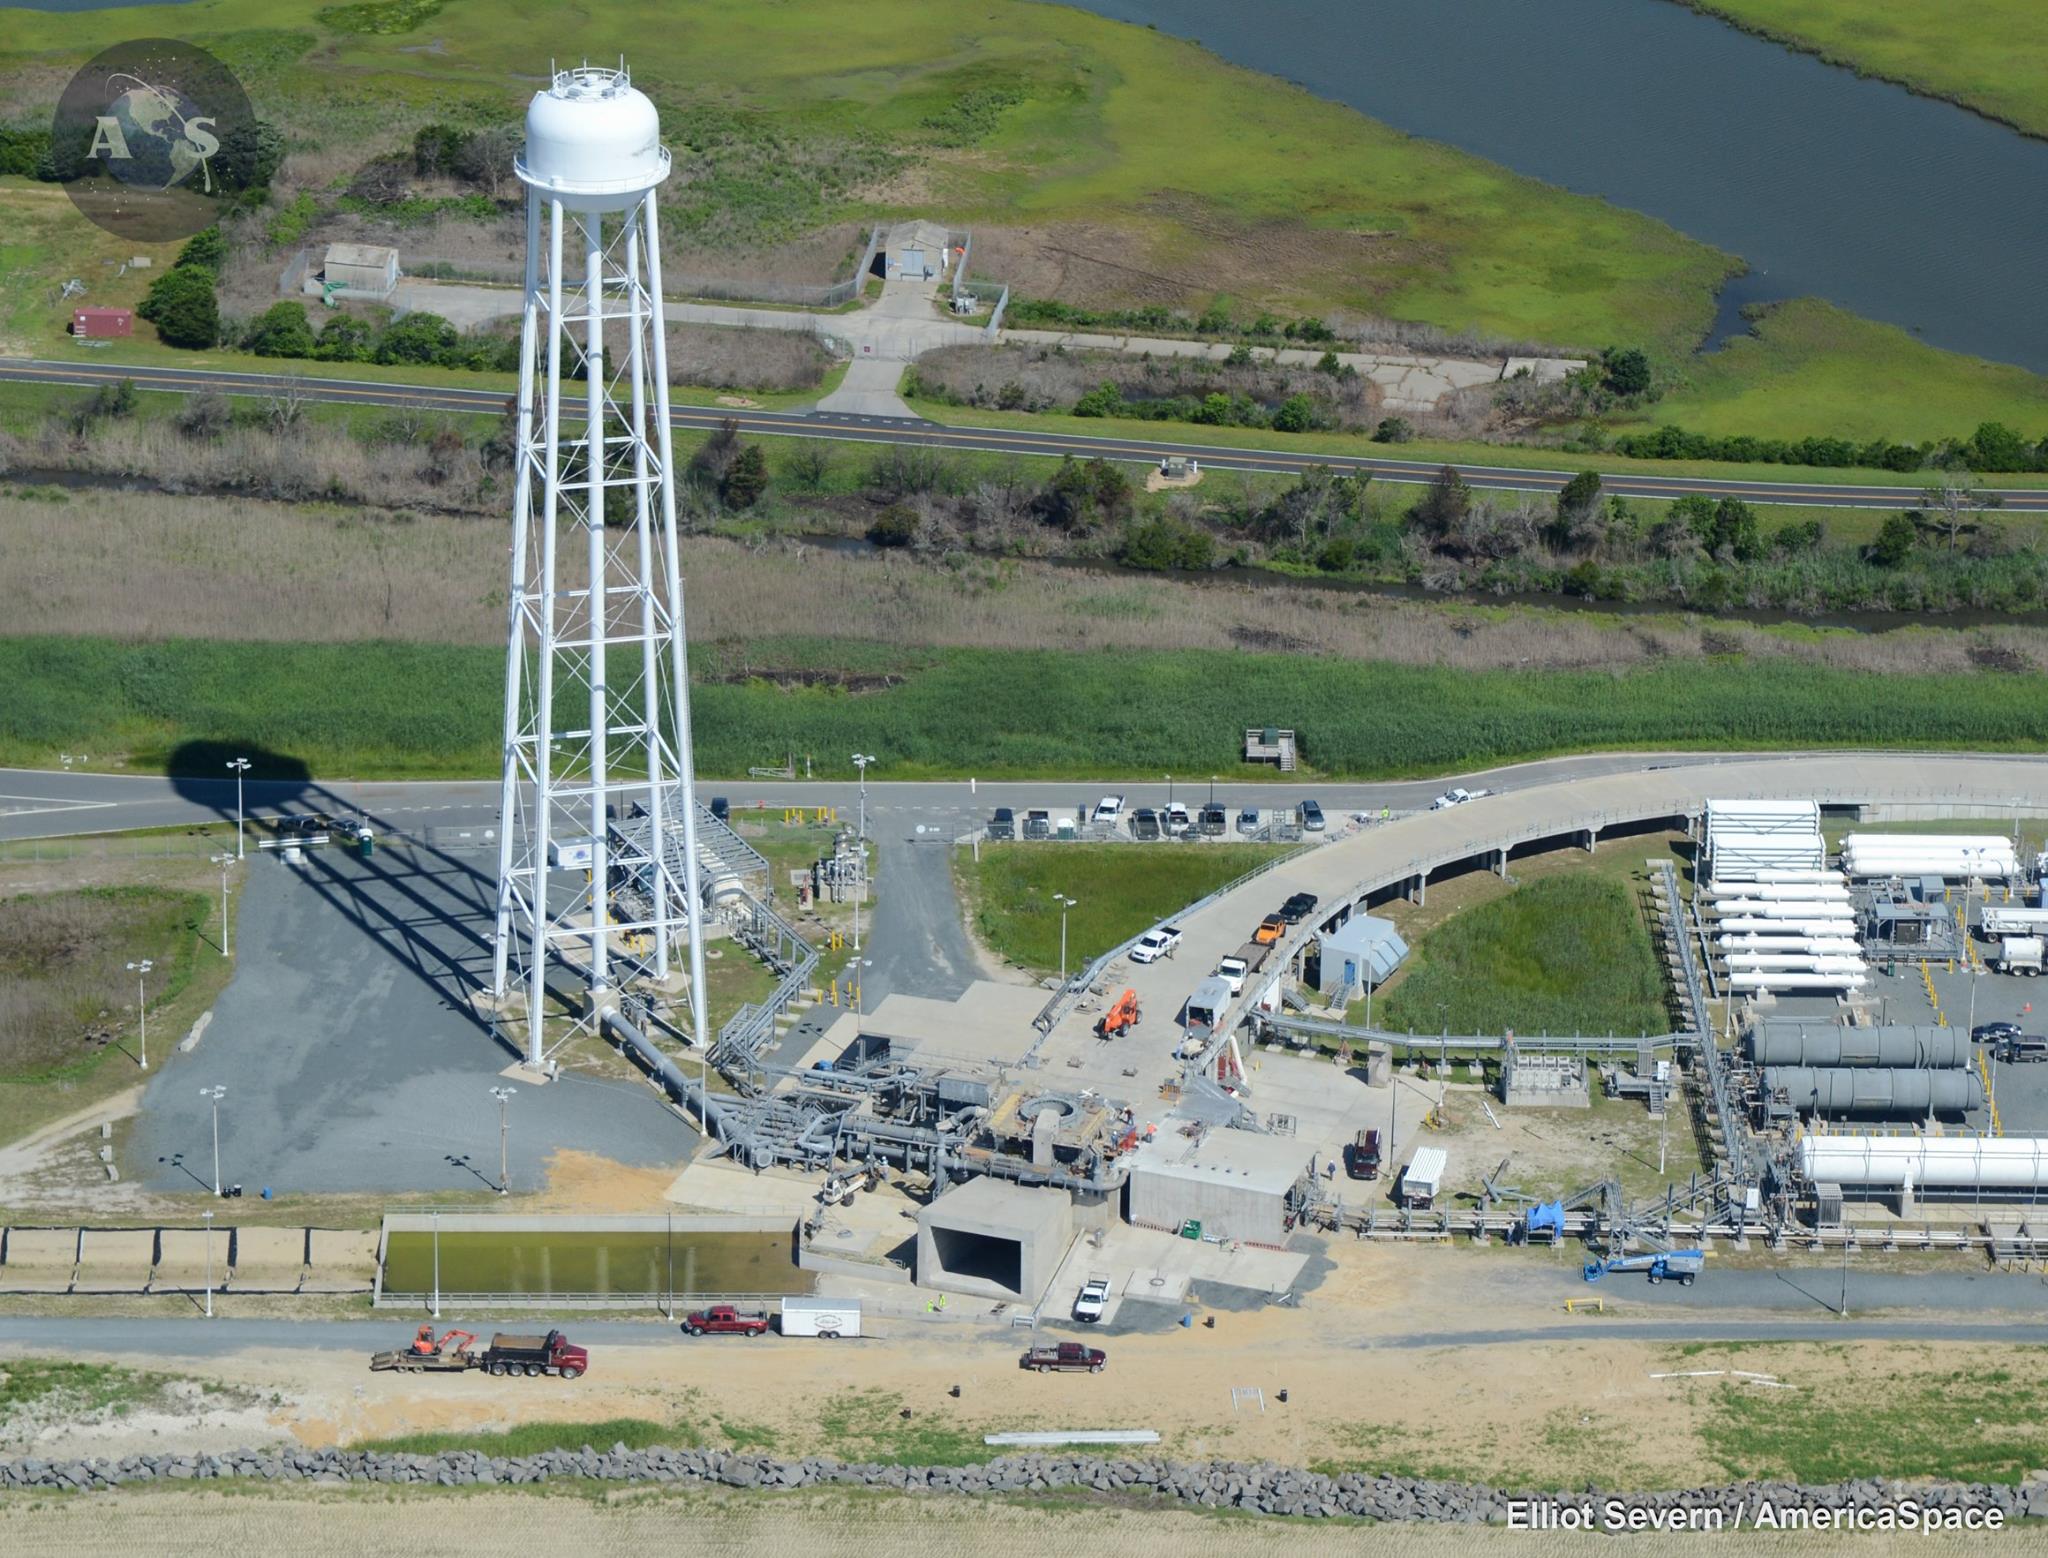 Aerial view of Launch Pad 0A at the Mid-Atlantic Regional Spaceport, taken as repairs were completed. Photo Credit: Elliot Severn / AmericaSpace